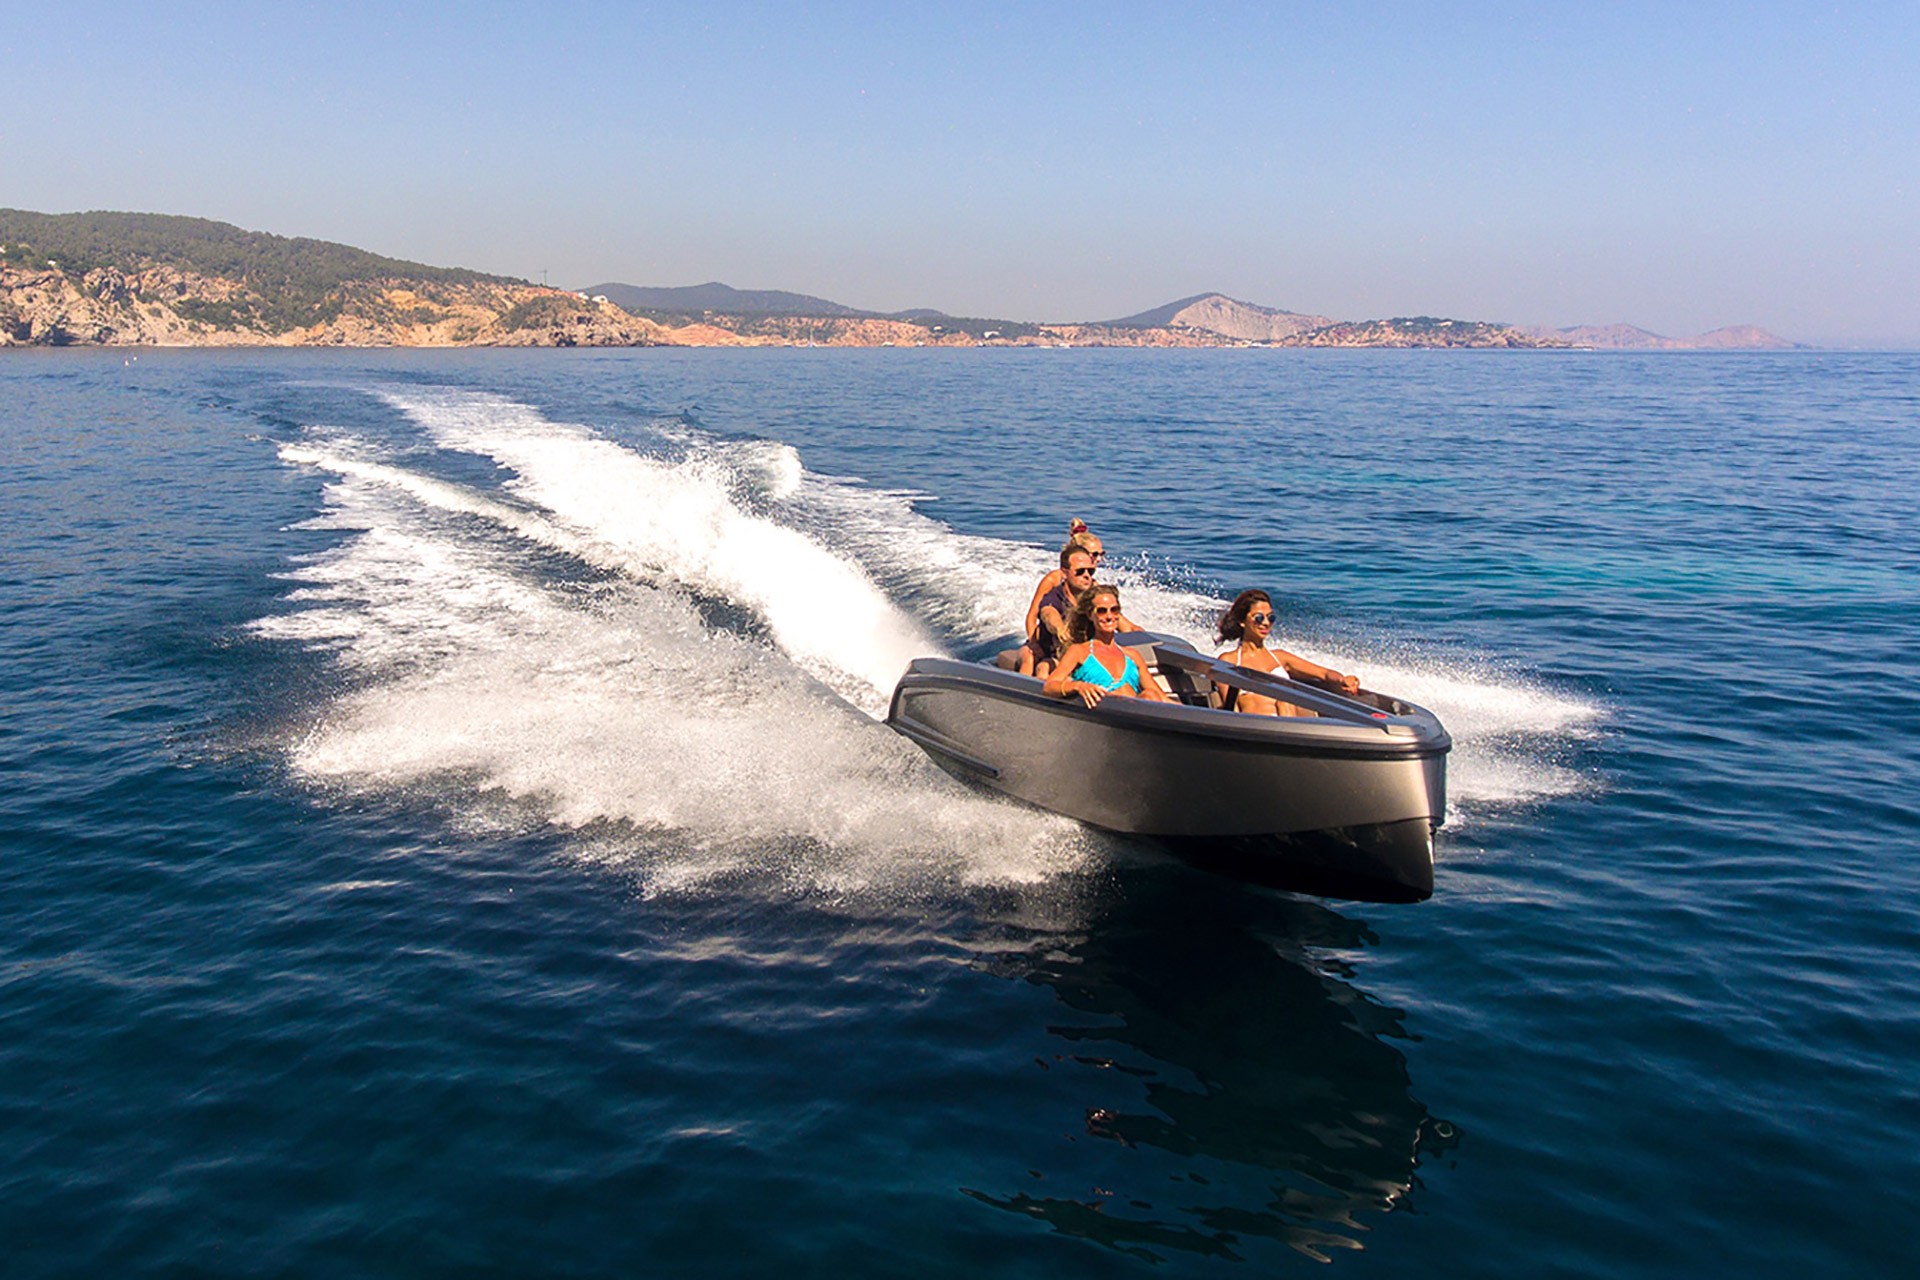 The Vanqraft VQ16 Is a Luxury Boat-Sized Jet Ski